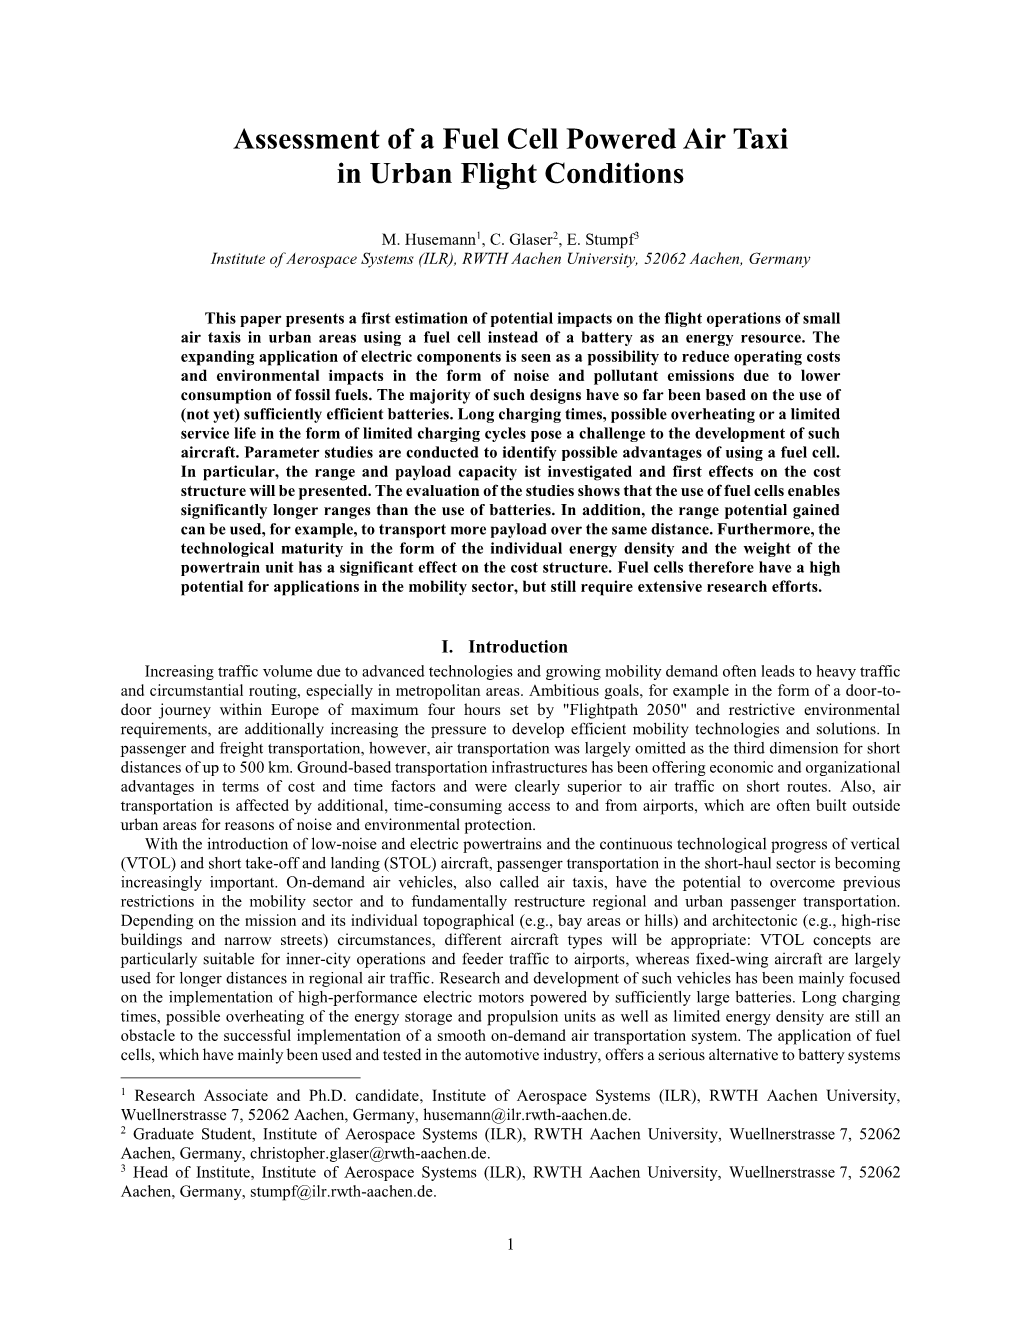 Assessment of a Fuel Cell Powered Air Taxi in Urban Flight Conditions